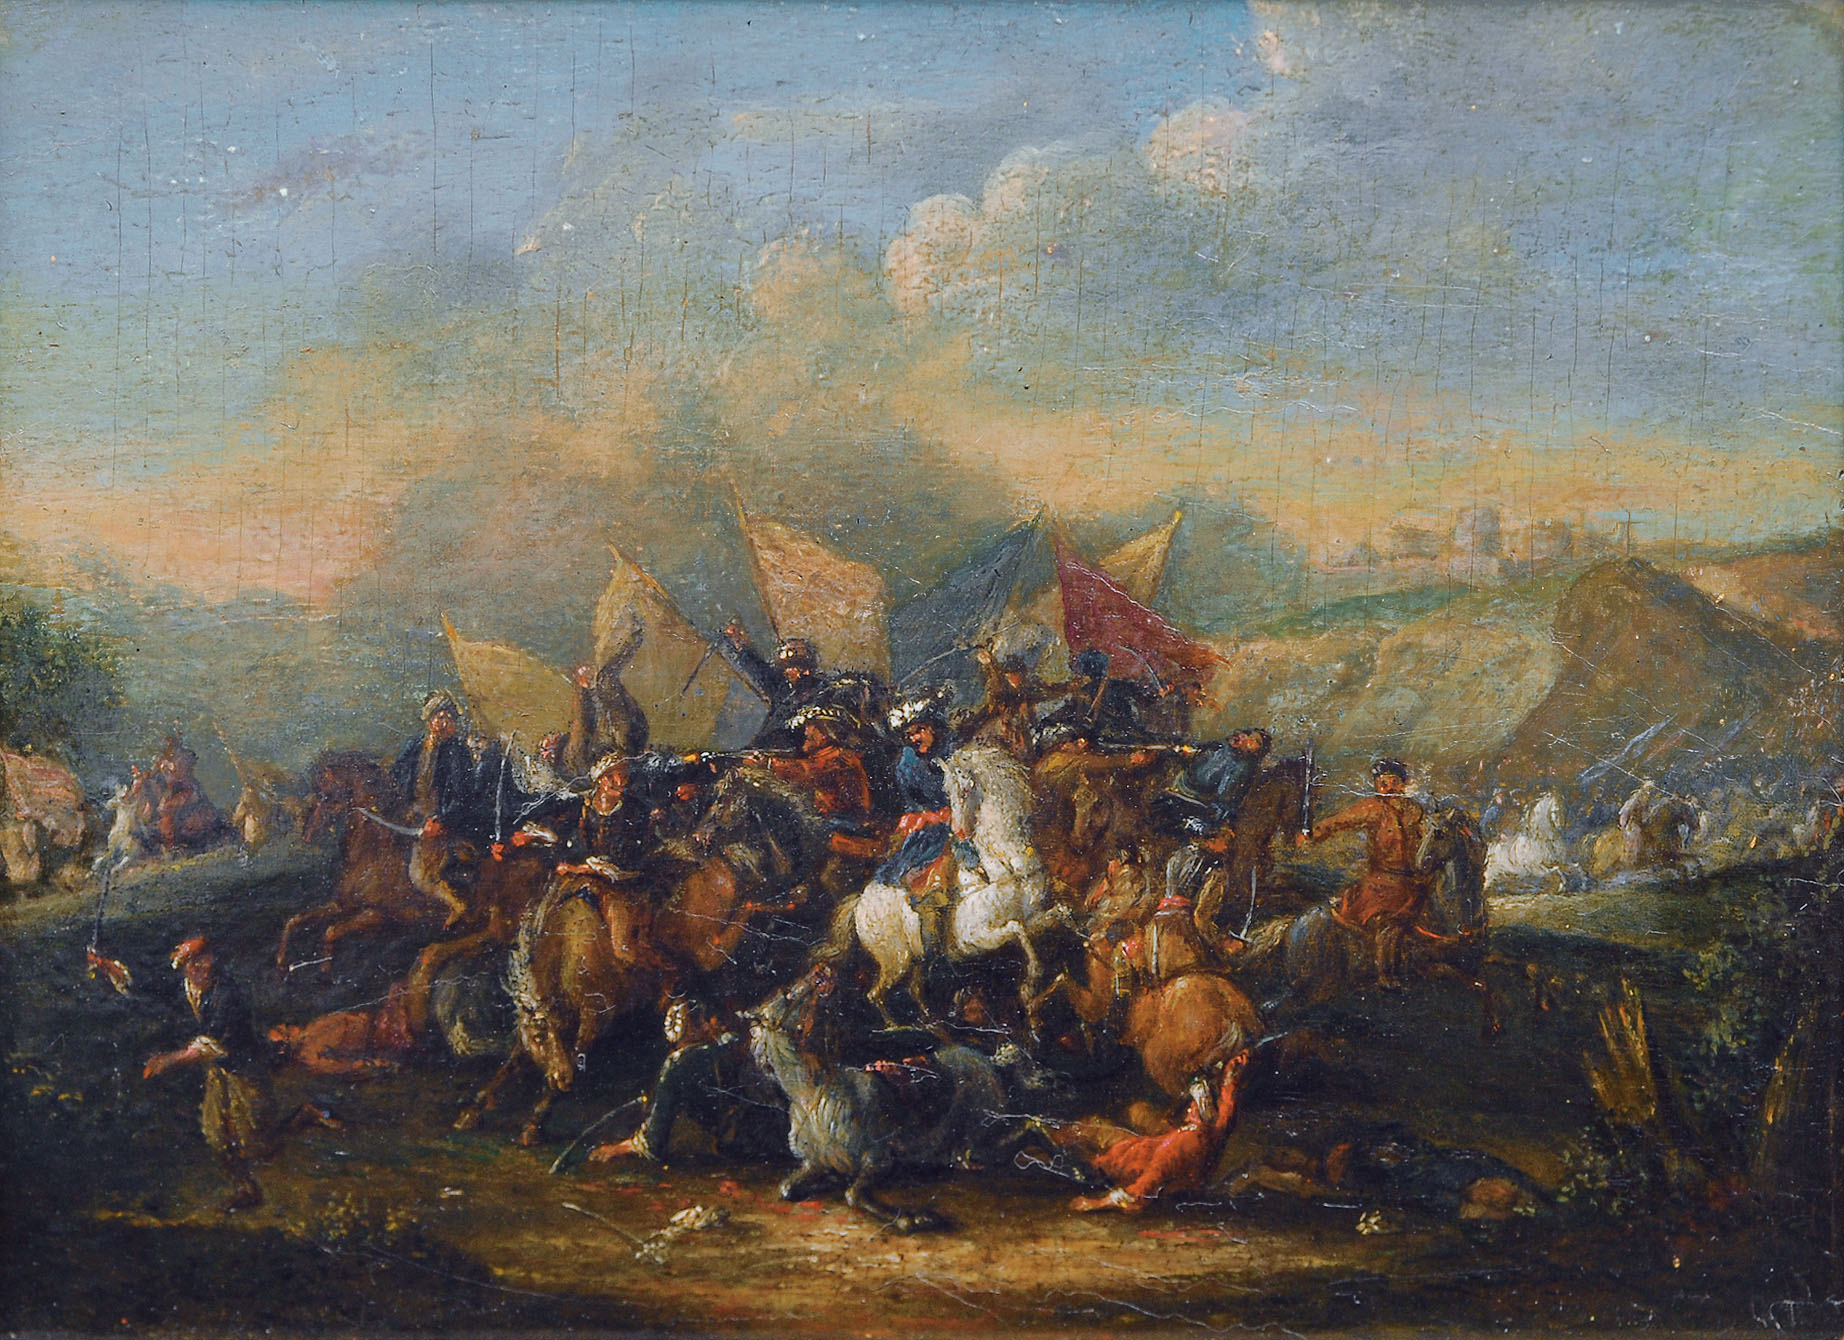 A cavalry combat between Turks and imperial soldiers